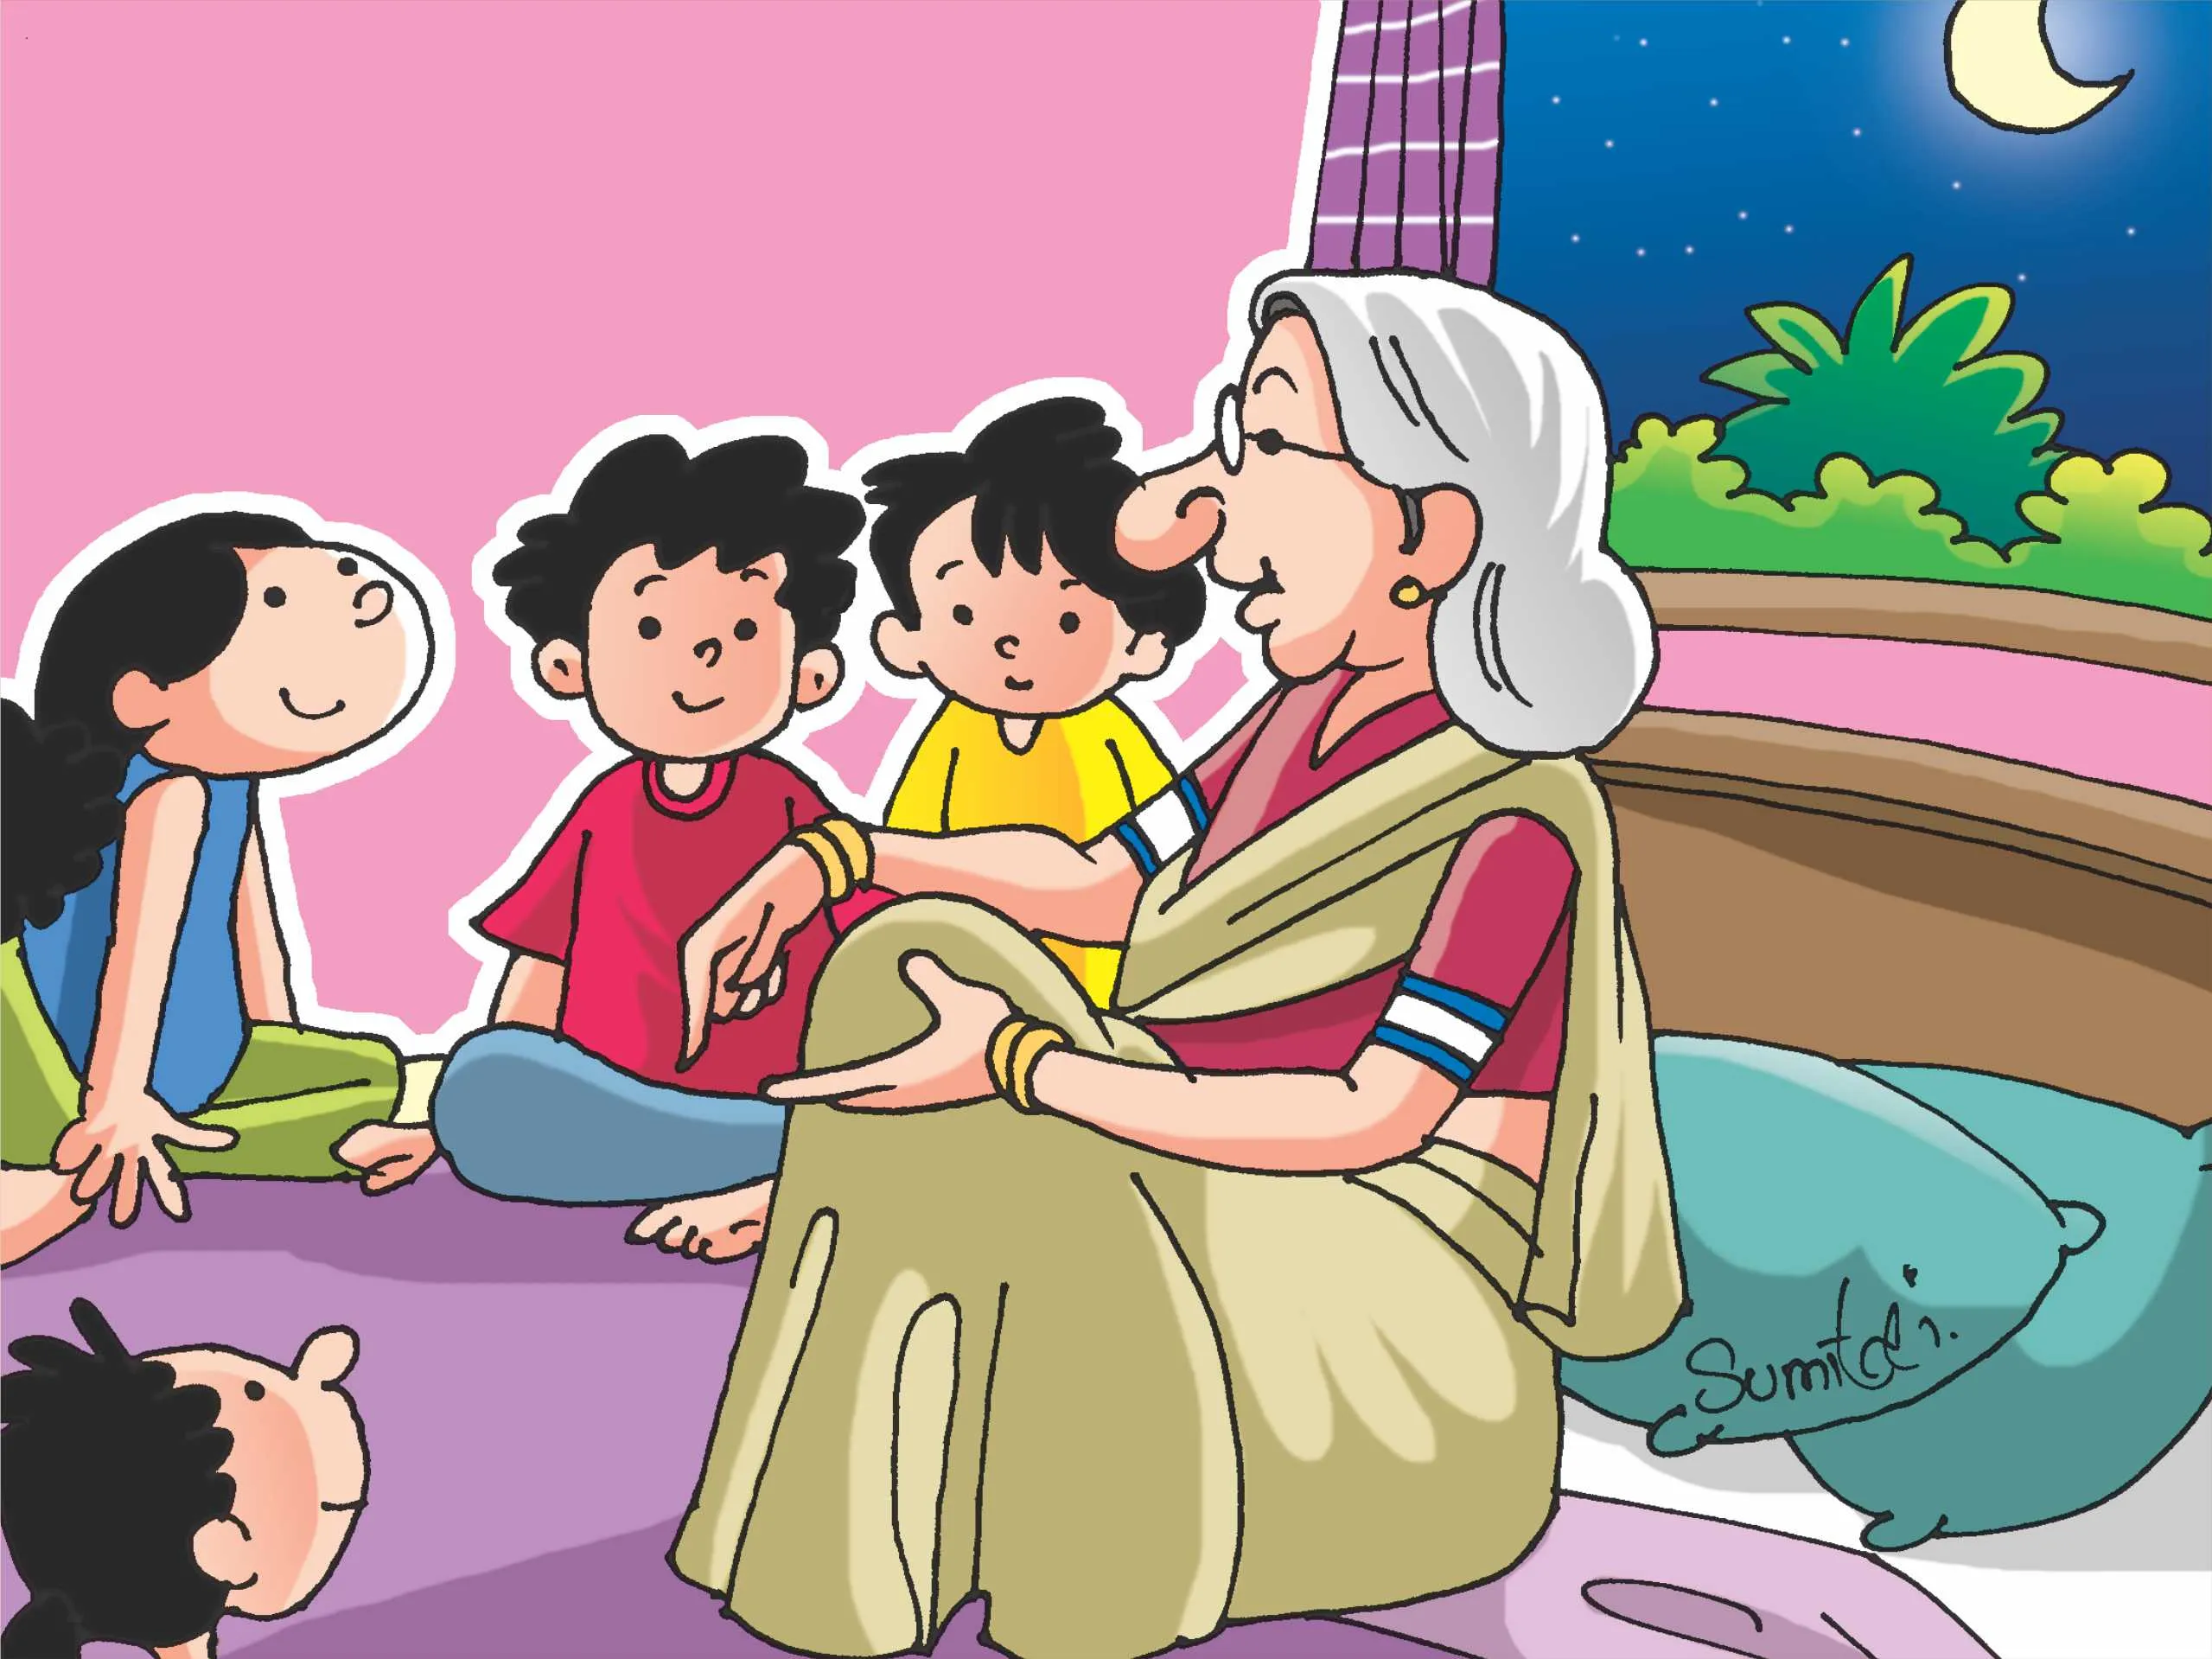 Grandmother telling story to kids in night cartoon image